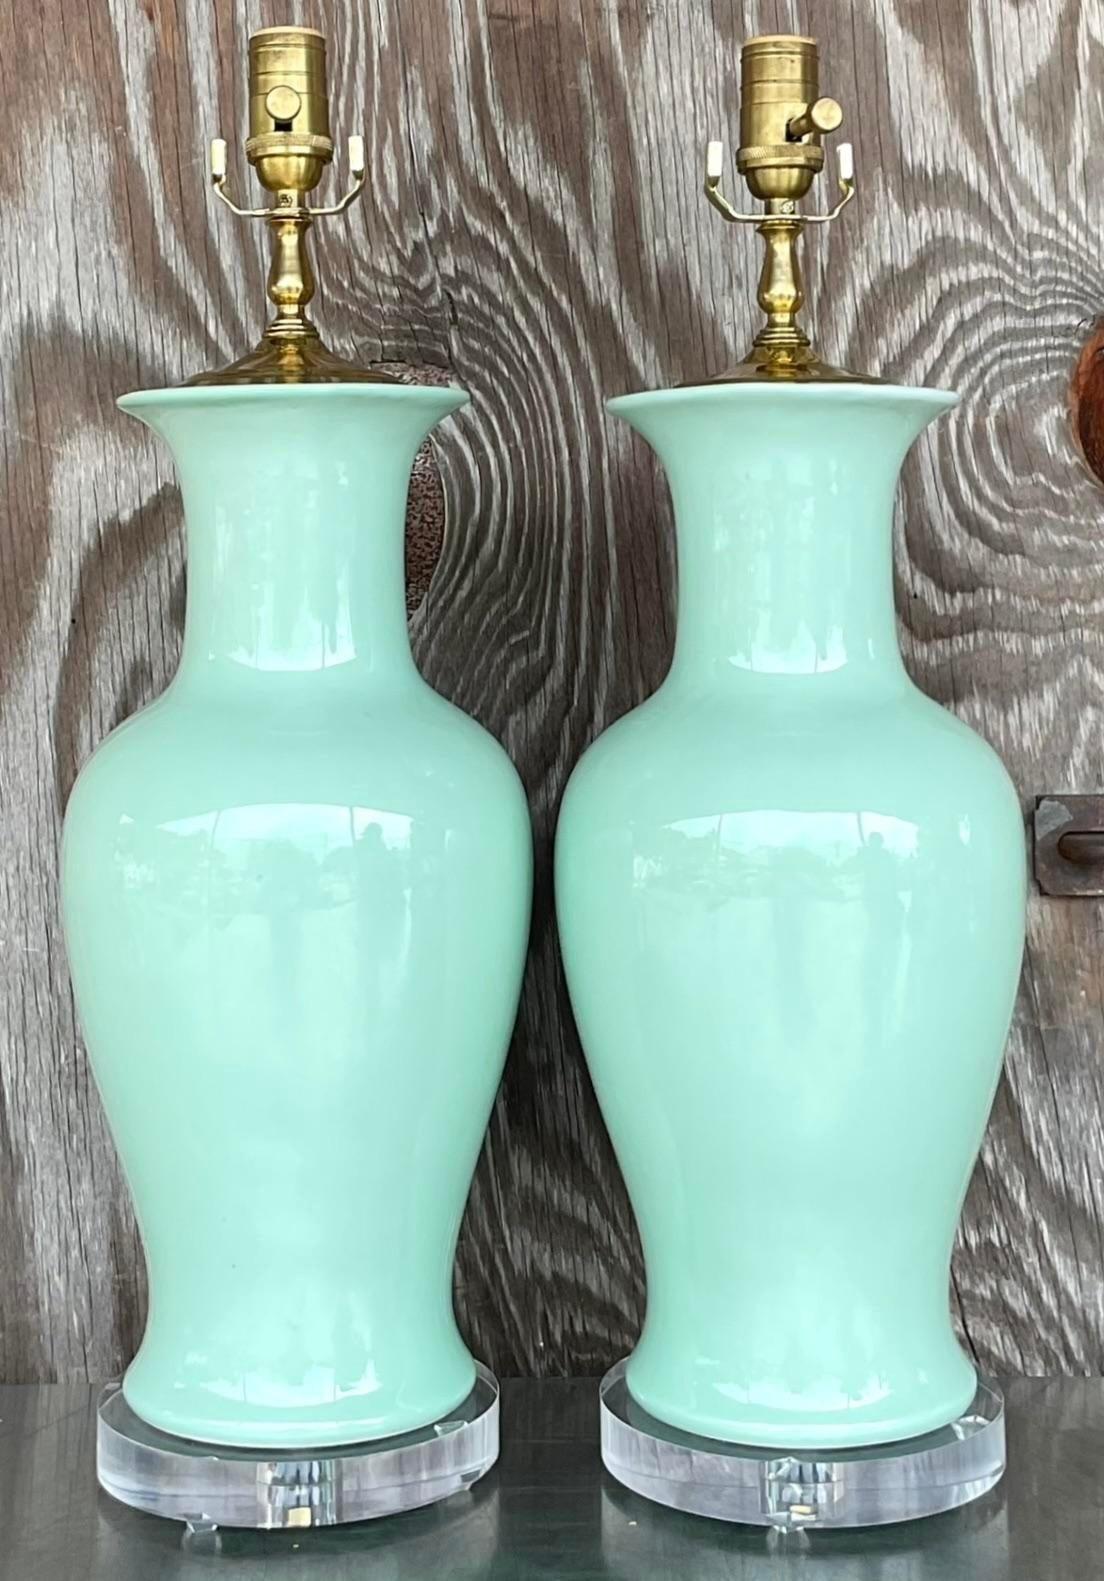 Metal Late 20th Century Vintage Regency Glazed Ceramic Table Lamps - a Pair For Sale